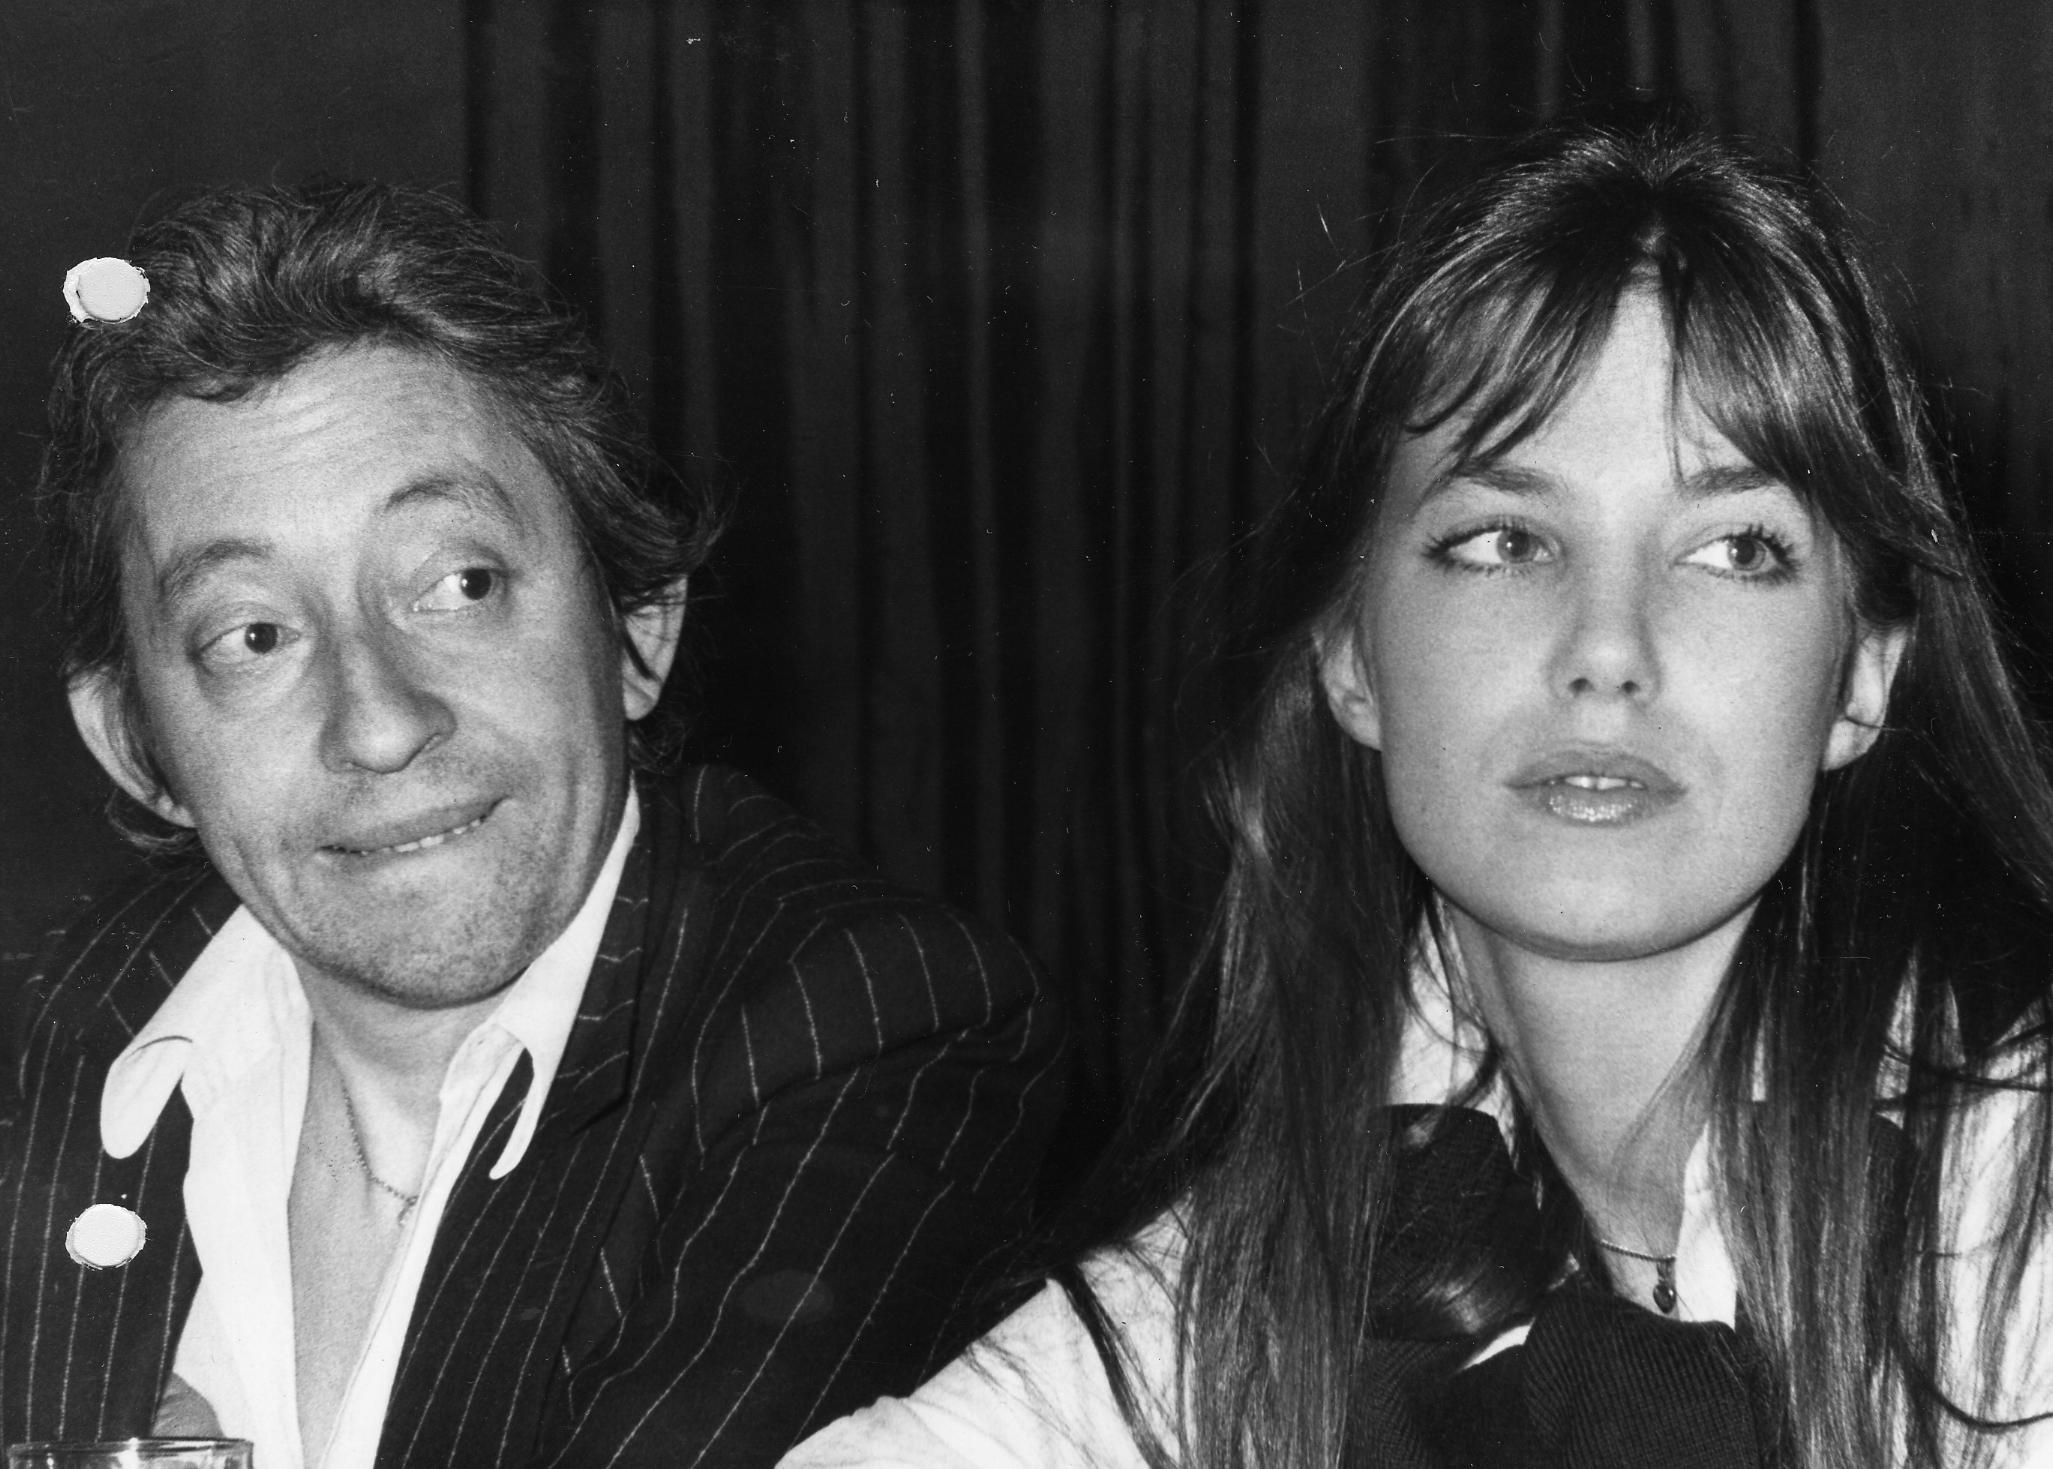 Serge + Jane - This week “marked 30 years since the death of Serge  Gainsbourg, but even after 3 decades, his style continues to inspire  alongside Jane Birkin here in Cannes in